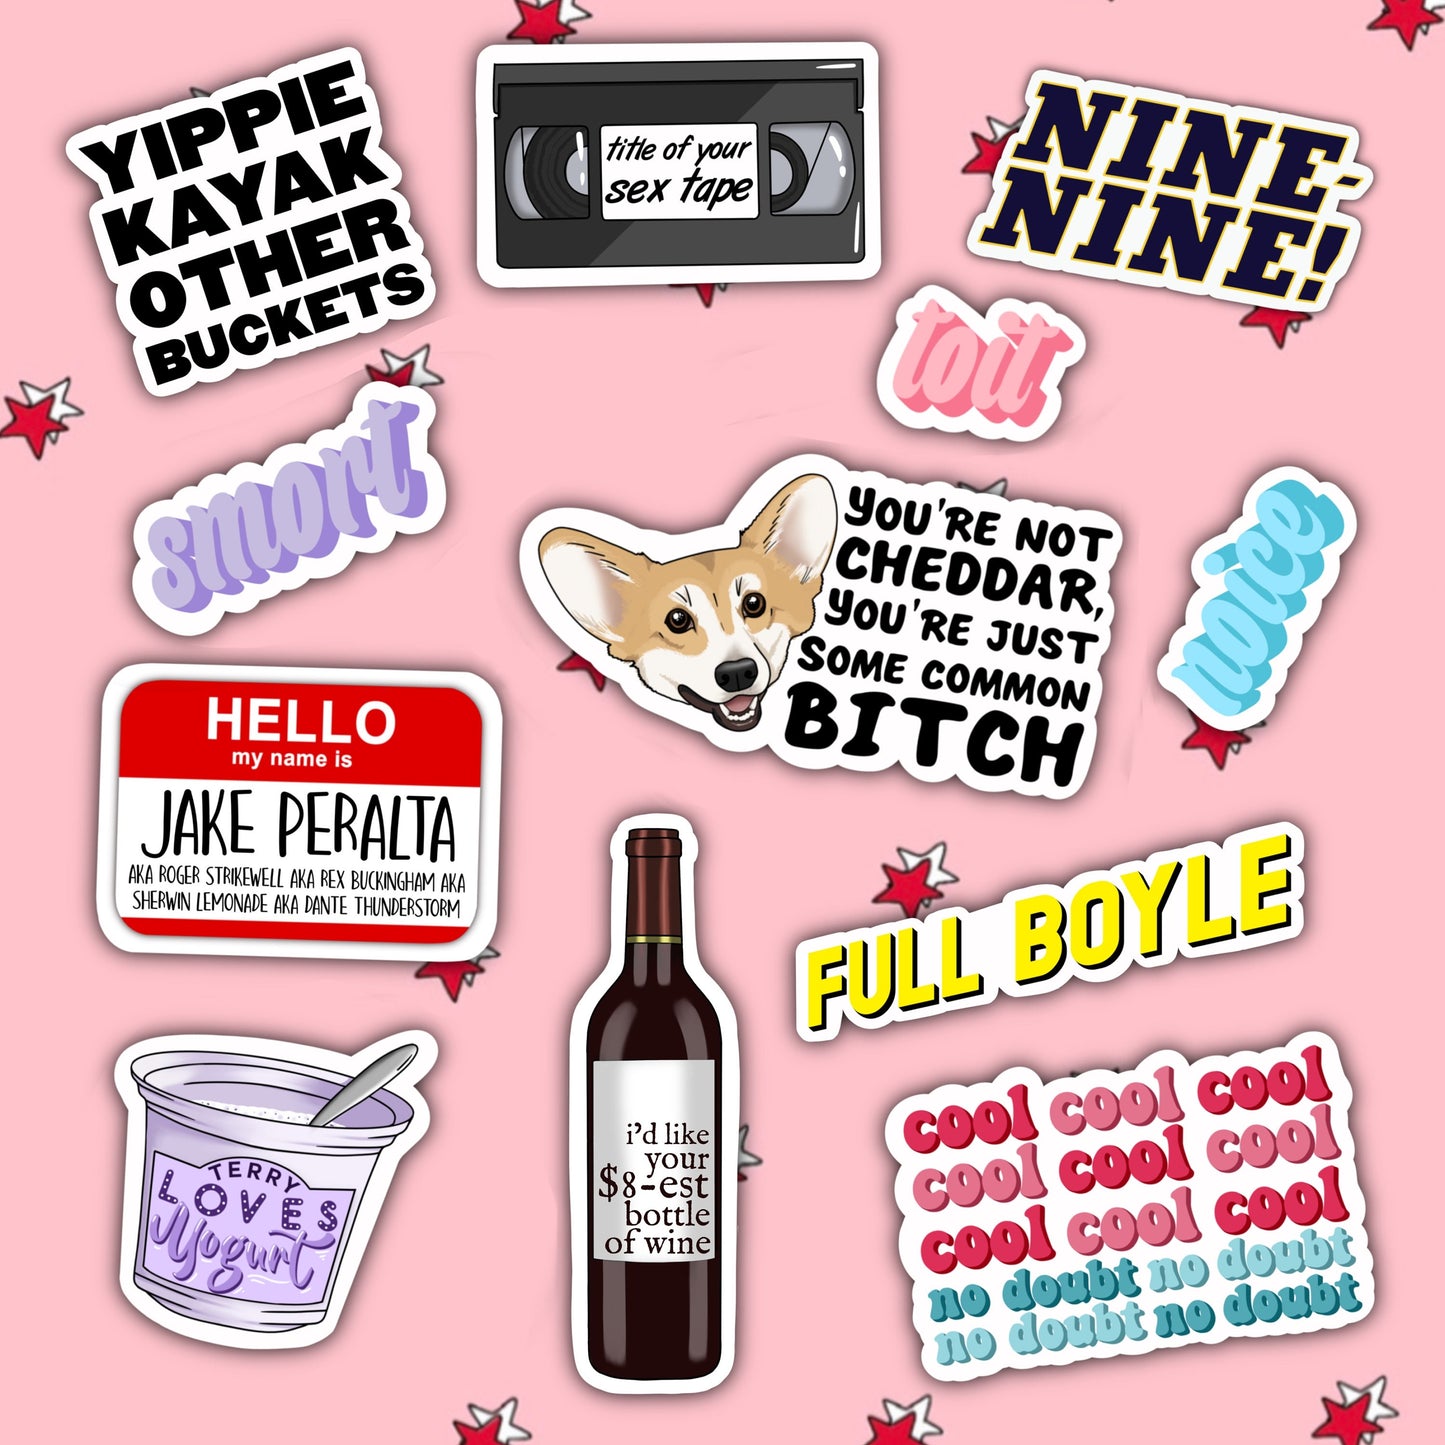 Yippie Kayak Other Buckets | Charles Boyle | Brooklyn 99 Stickers